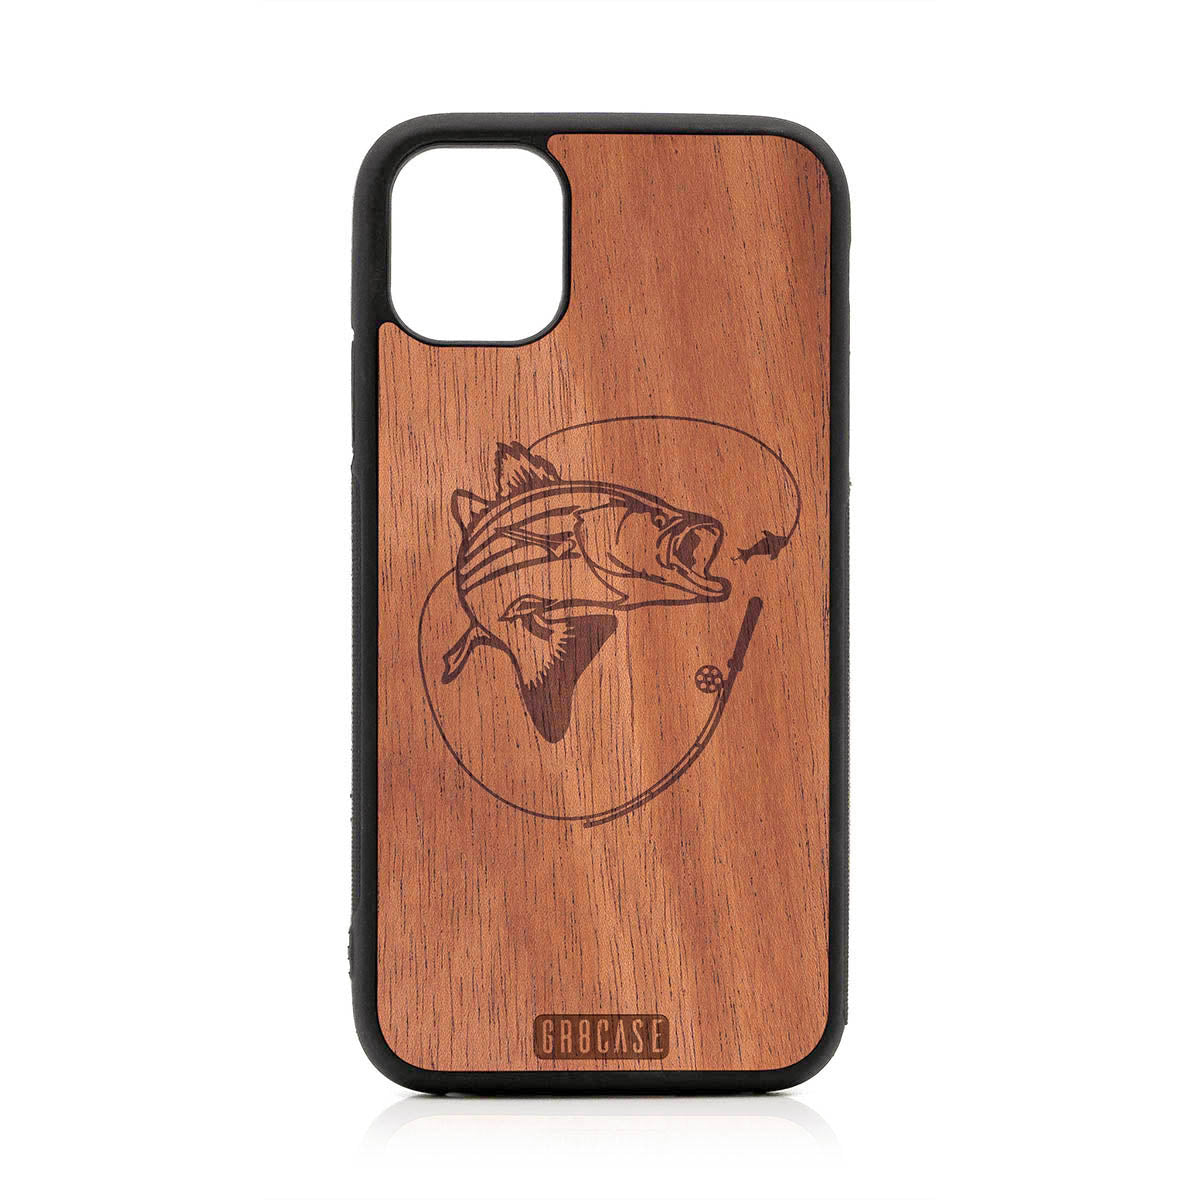 Fish and Reel Design Wood Case For iPhone 11 by GR8CASE